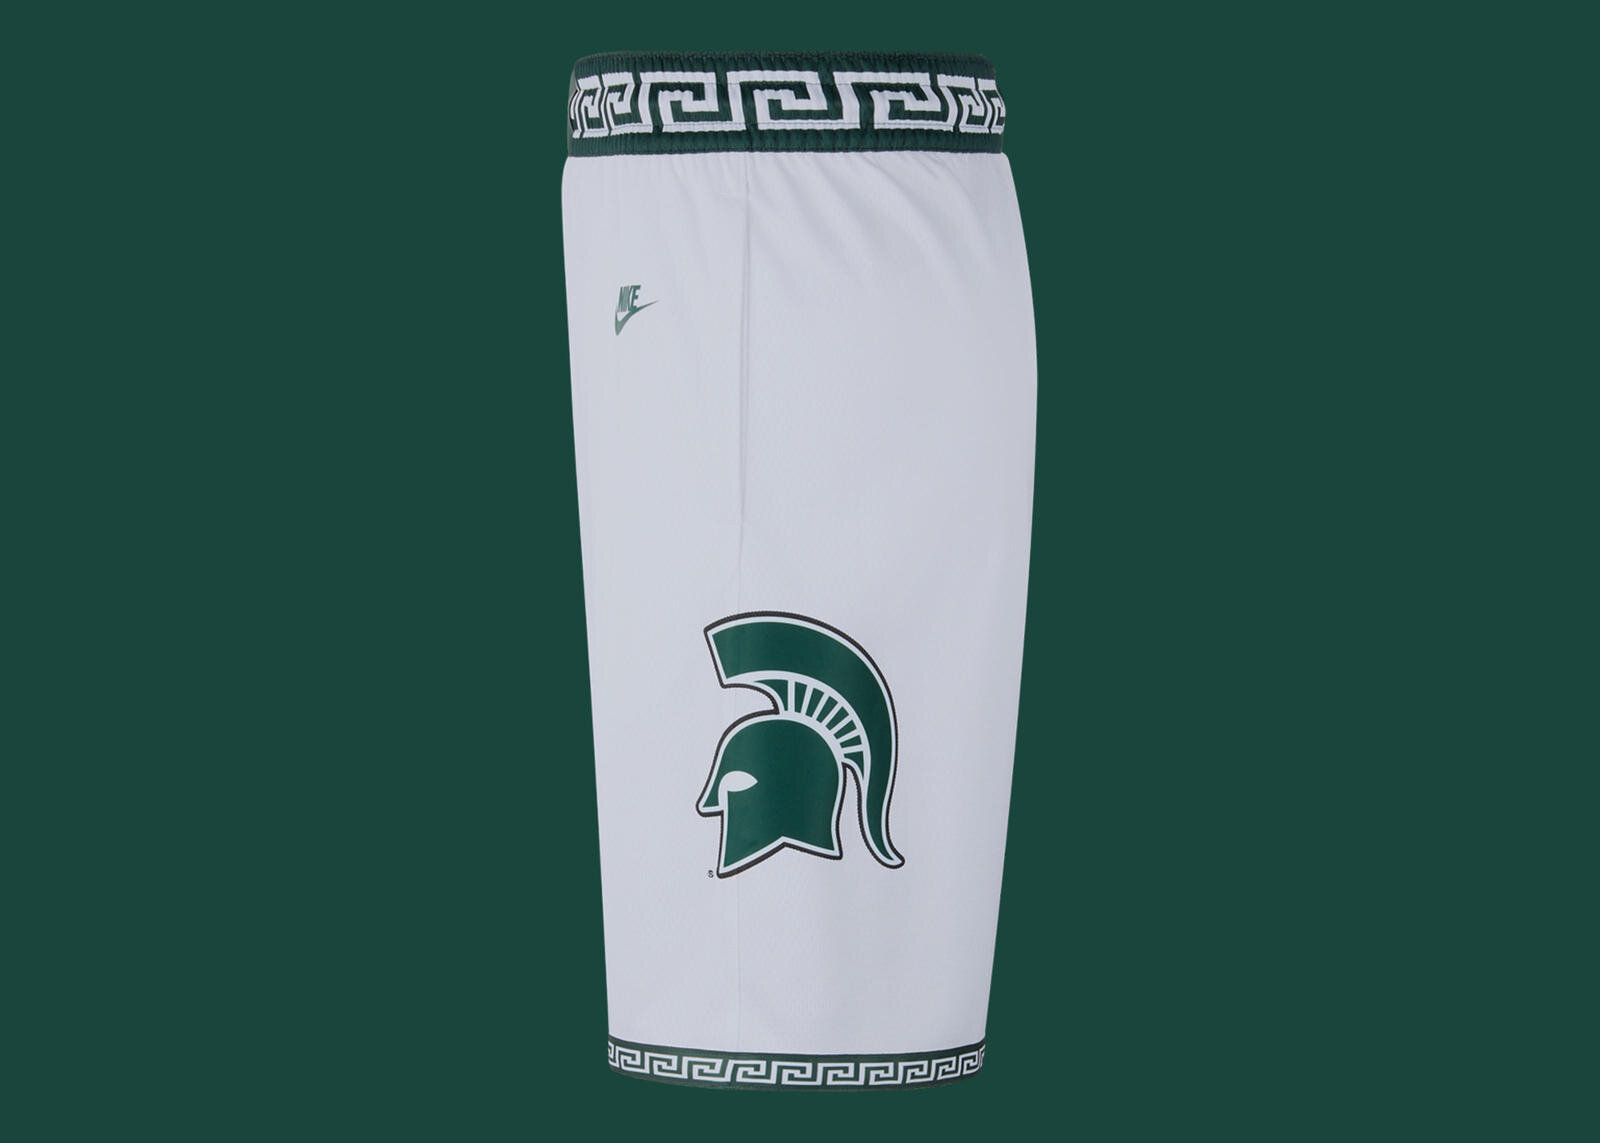 A closer look at Michigan State basketball's 2000 throwback